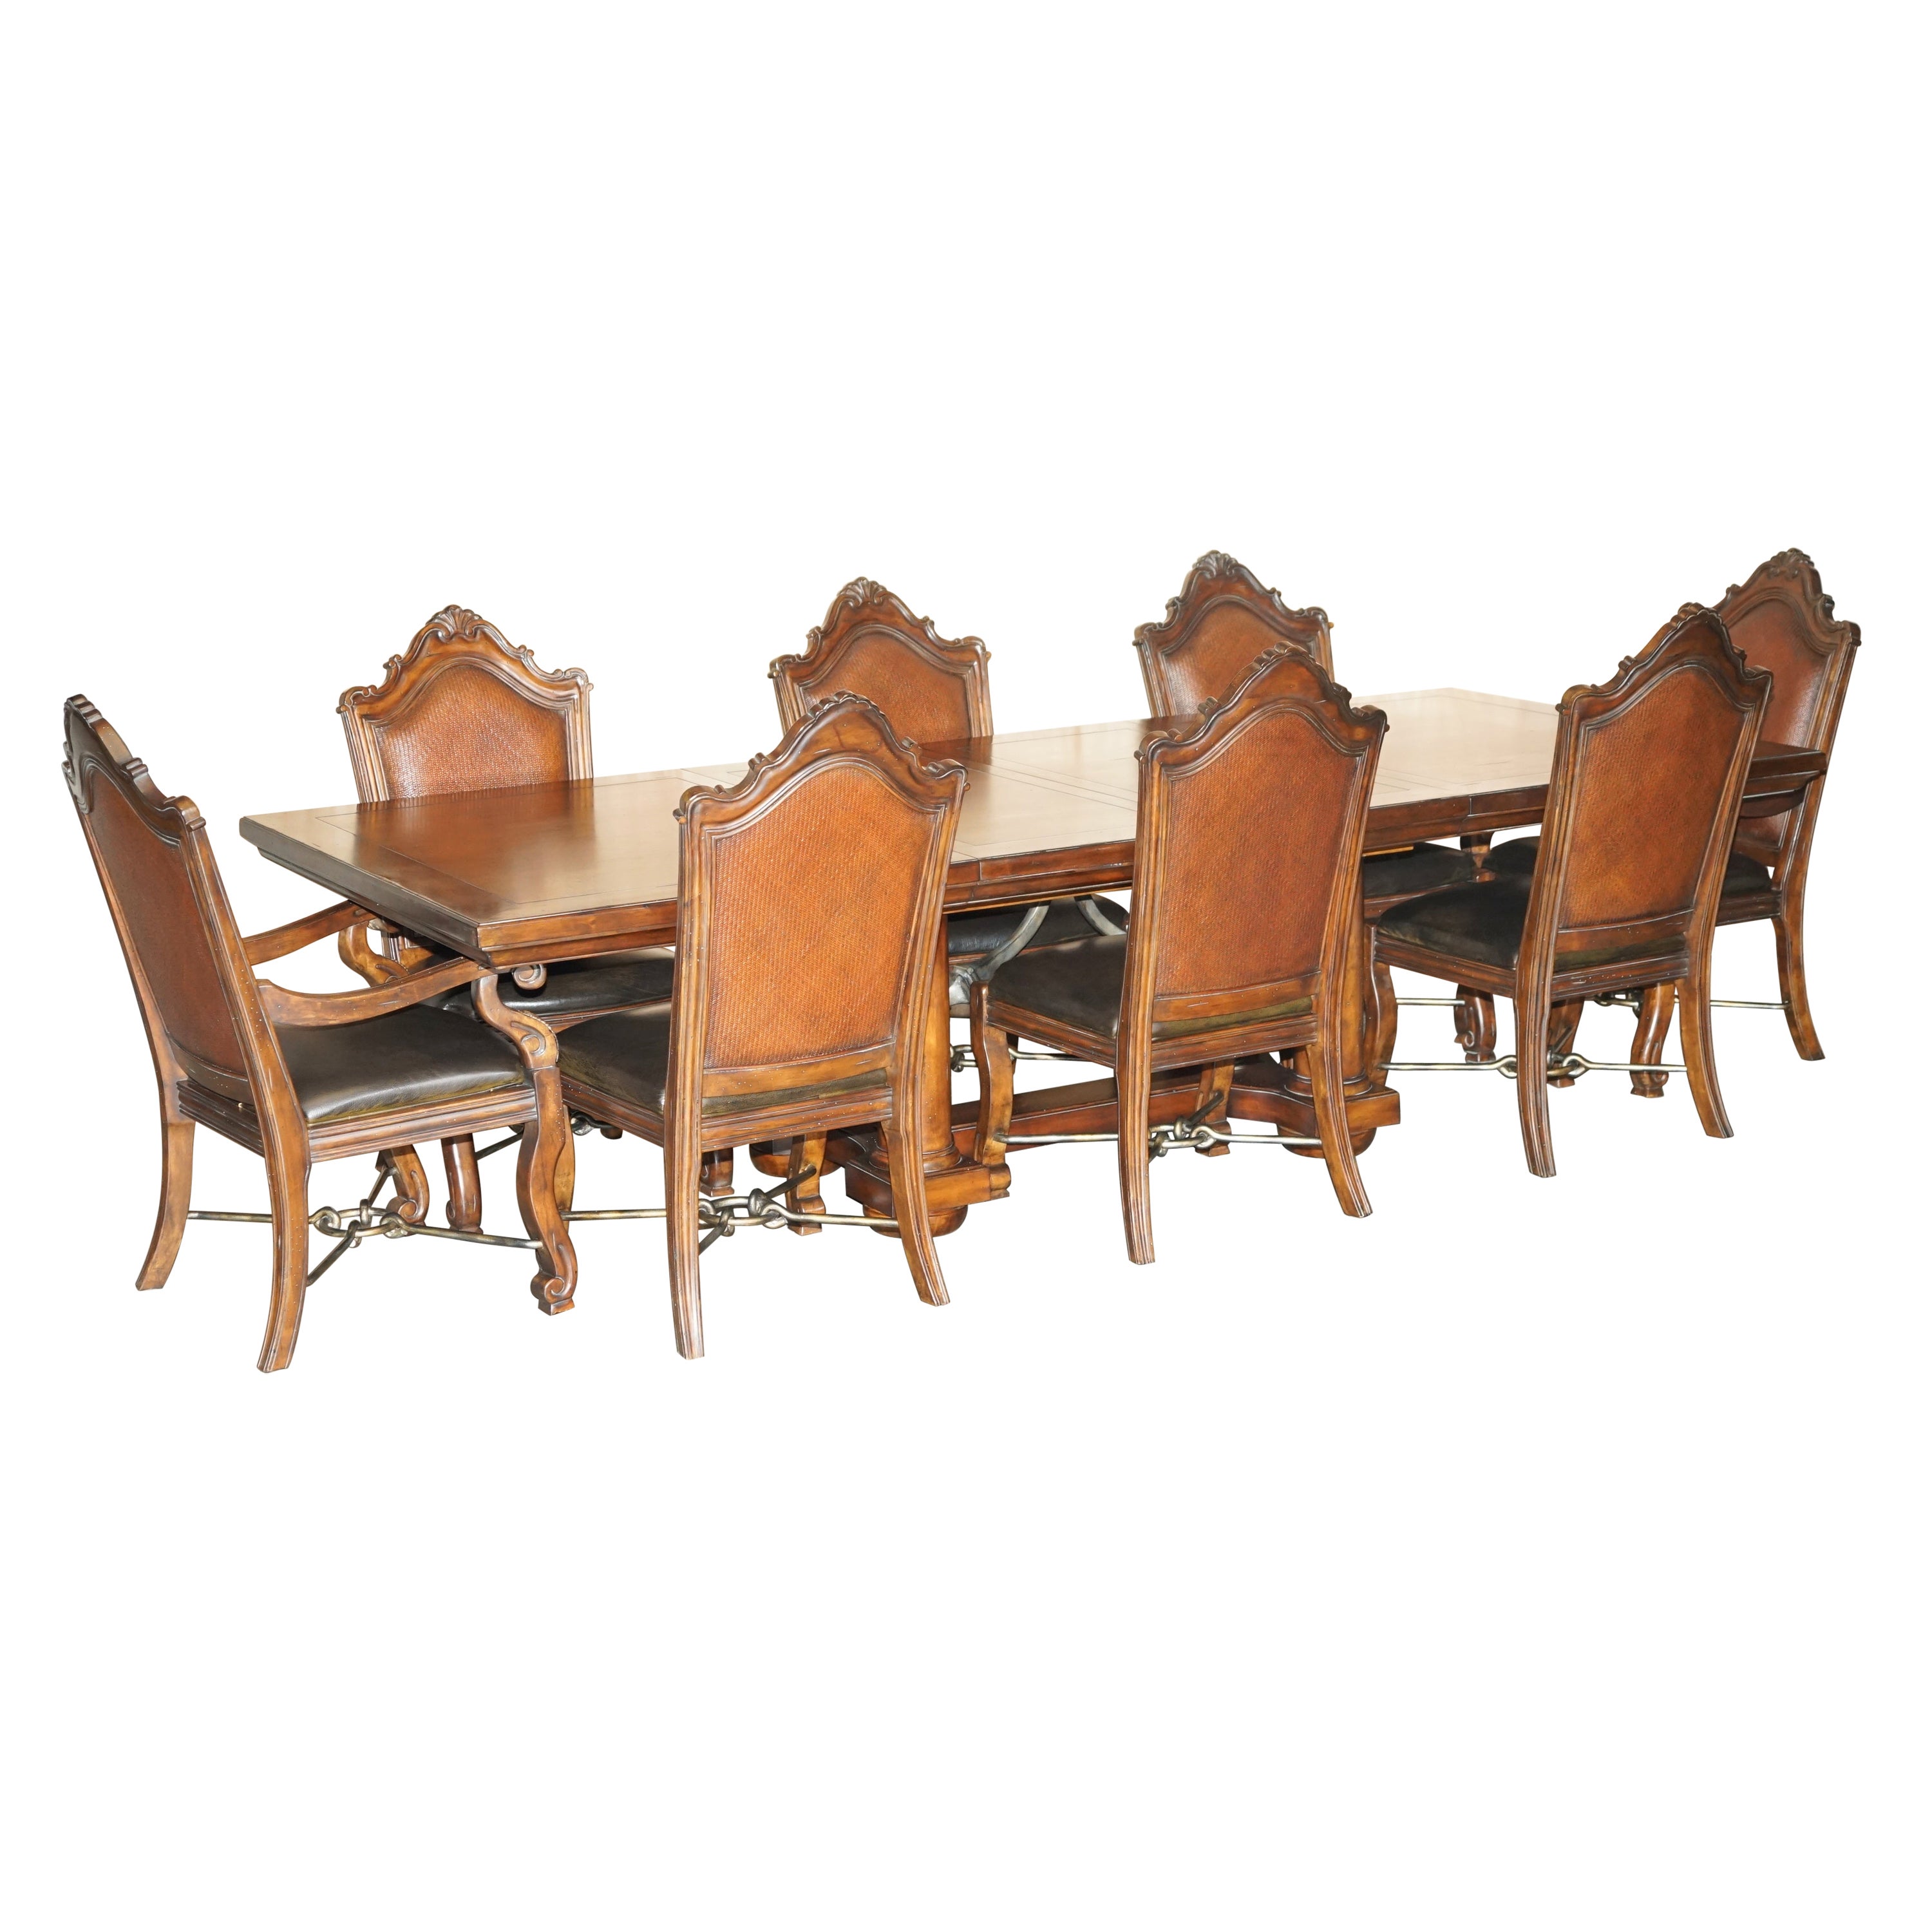 EXQUISITE THOMASVILLE SAFARI COLLECTION EXTENDING DiNING TABLE & EIGHT CHAIRS For Sale